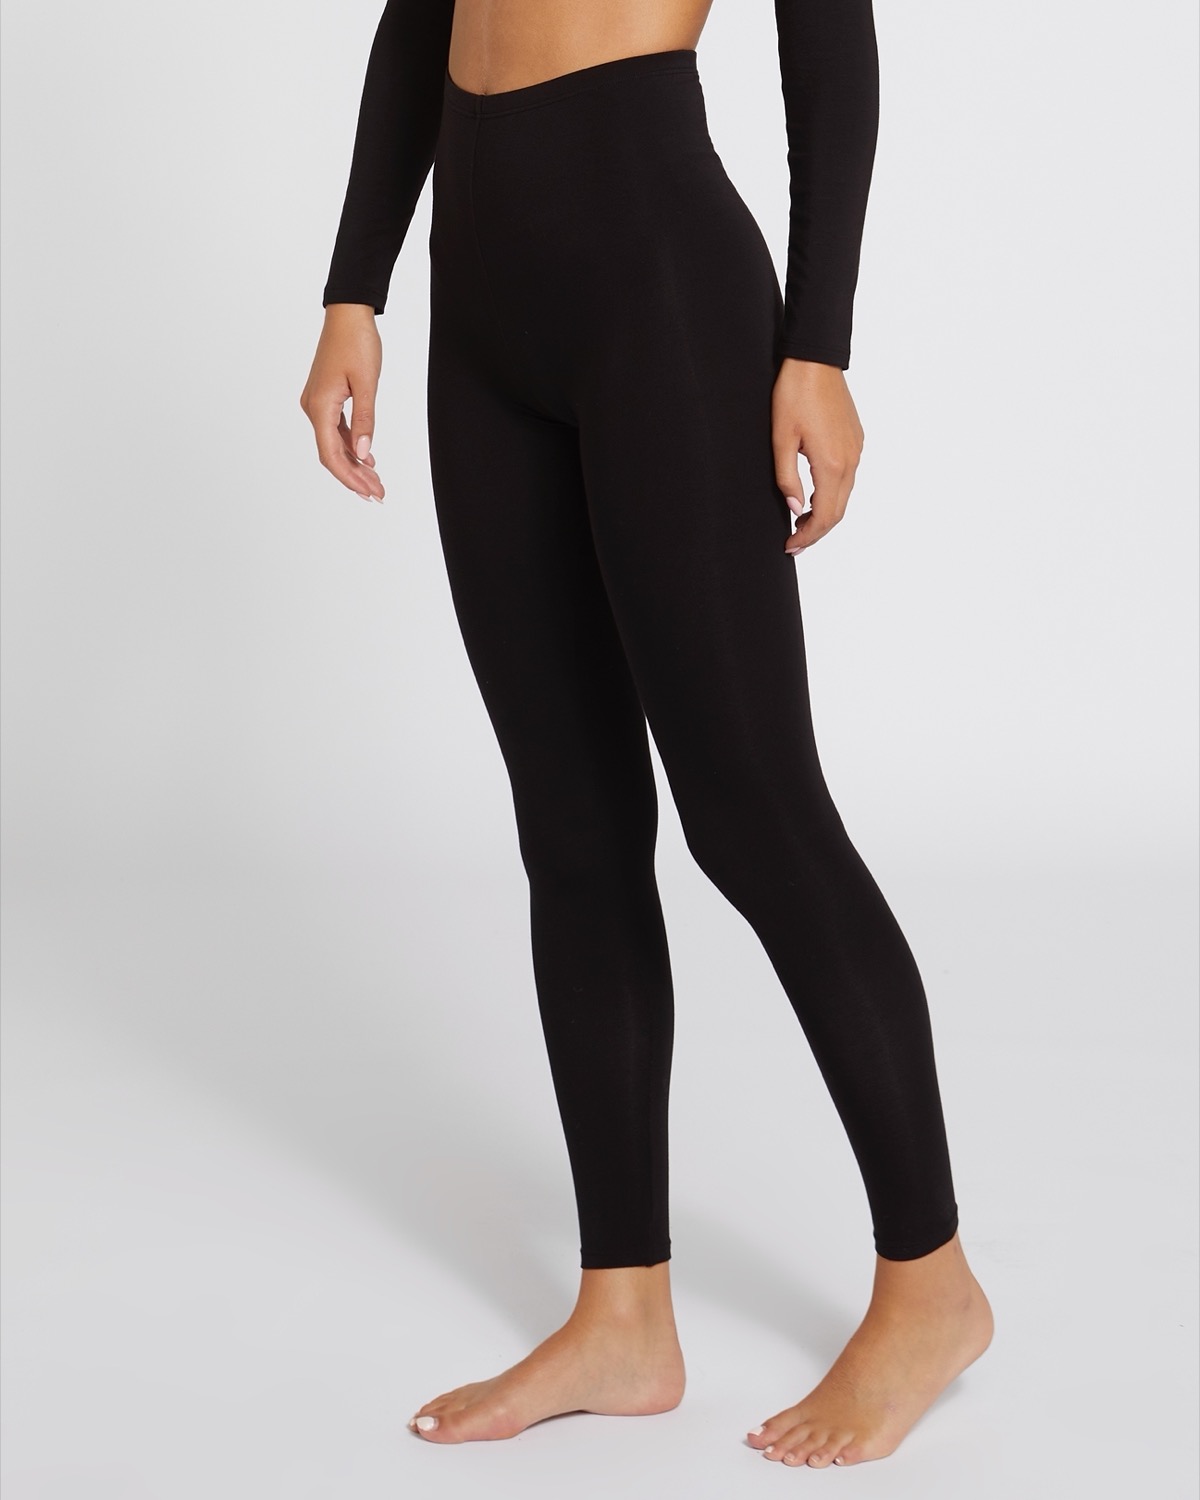 Thermal Heat Activate Extra Warmth Leggings